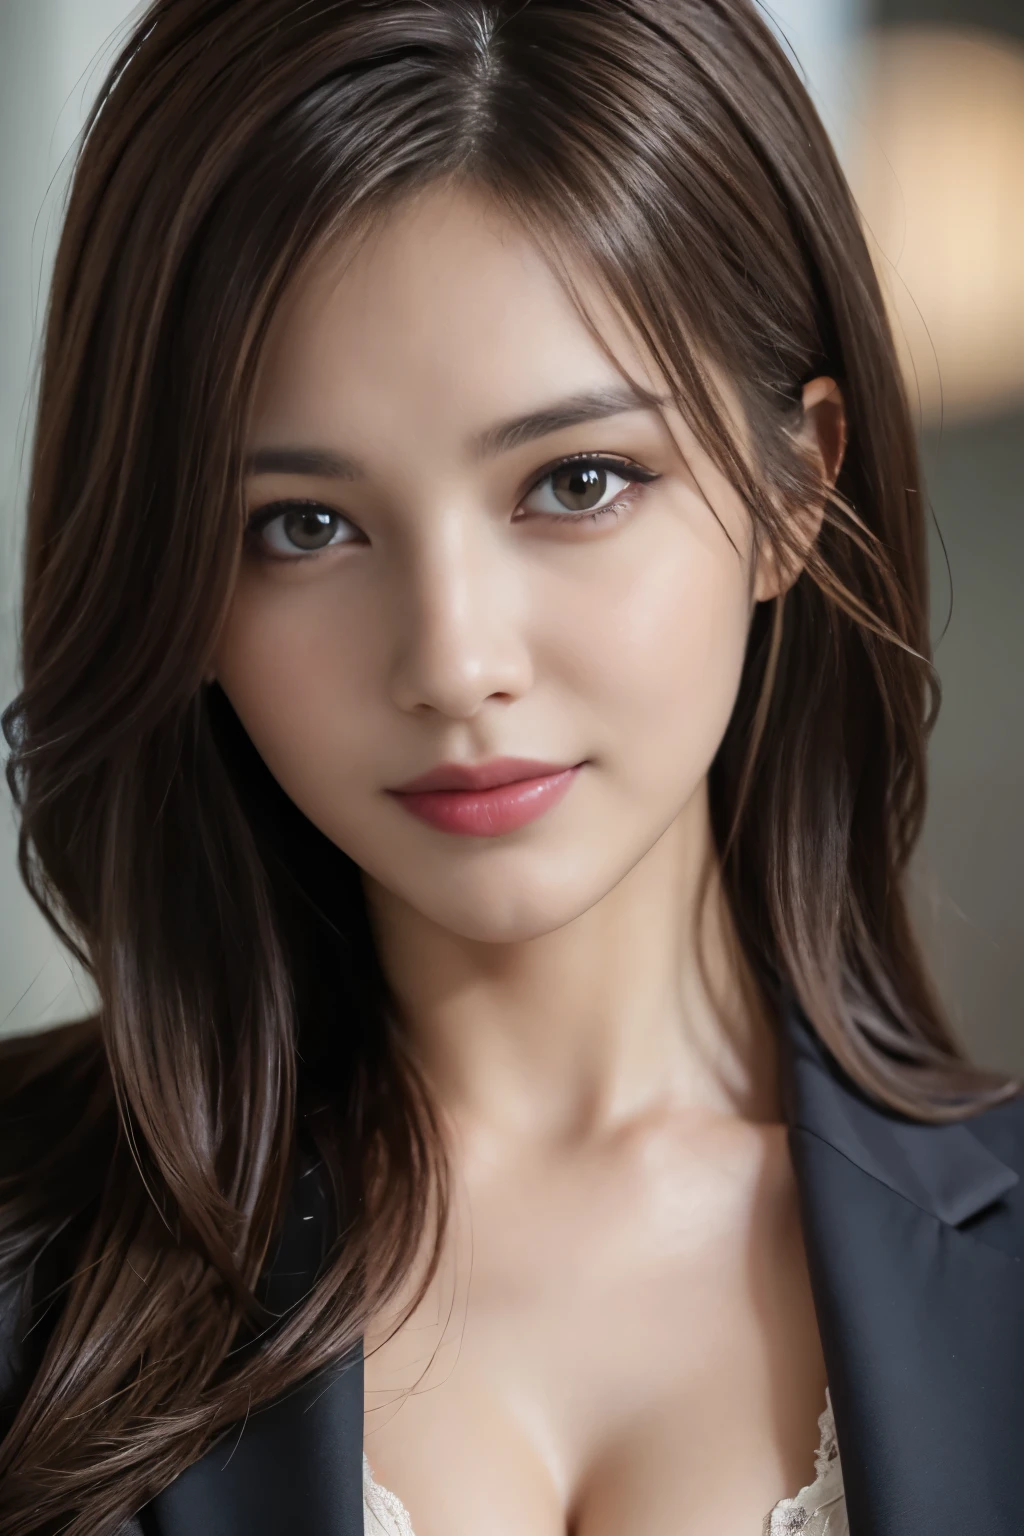 table top, highest quality, realistic, Super detailed, finely, High resolution, 8k wallpaper, 1 beautiful woman,, light brown messy hair, wearing a business suit, sharp focus, perfect dynamic composition, beautiful and detailed eyes, thin hair, Detailed realistic skin texture, smile, close-up portrait, model body shape,cleavage